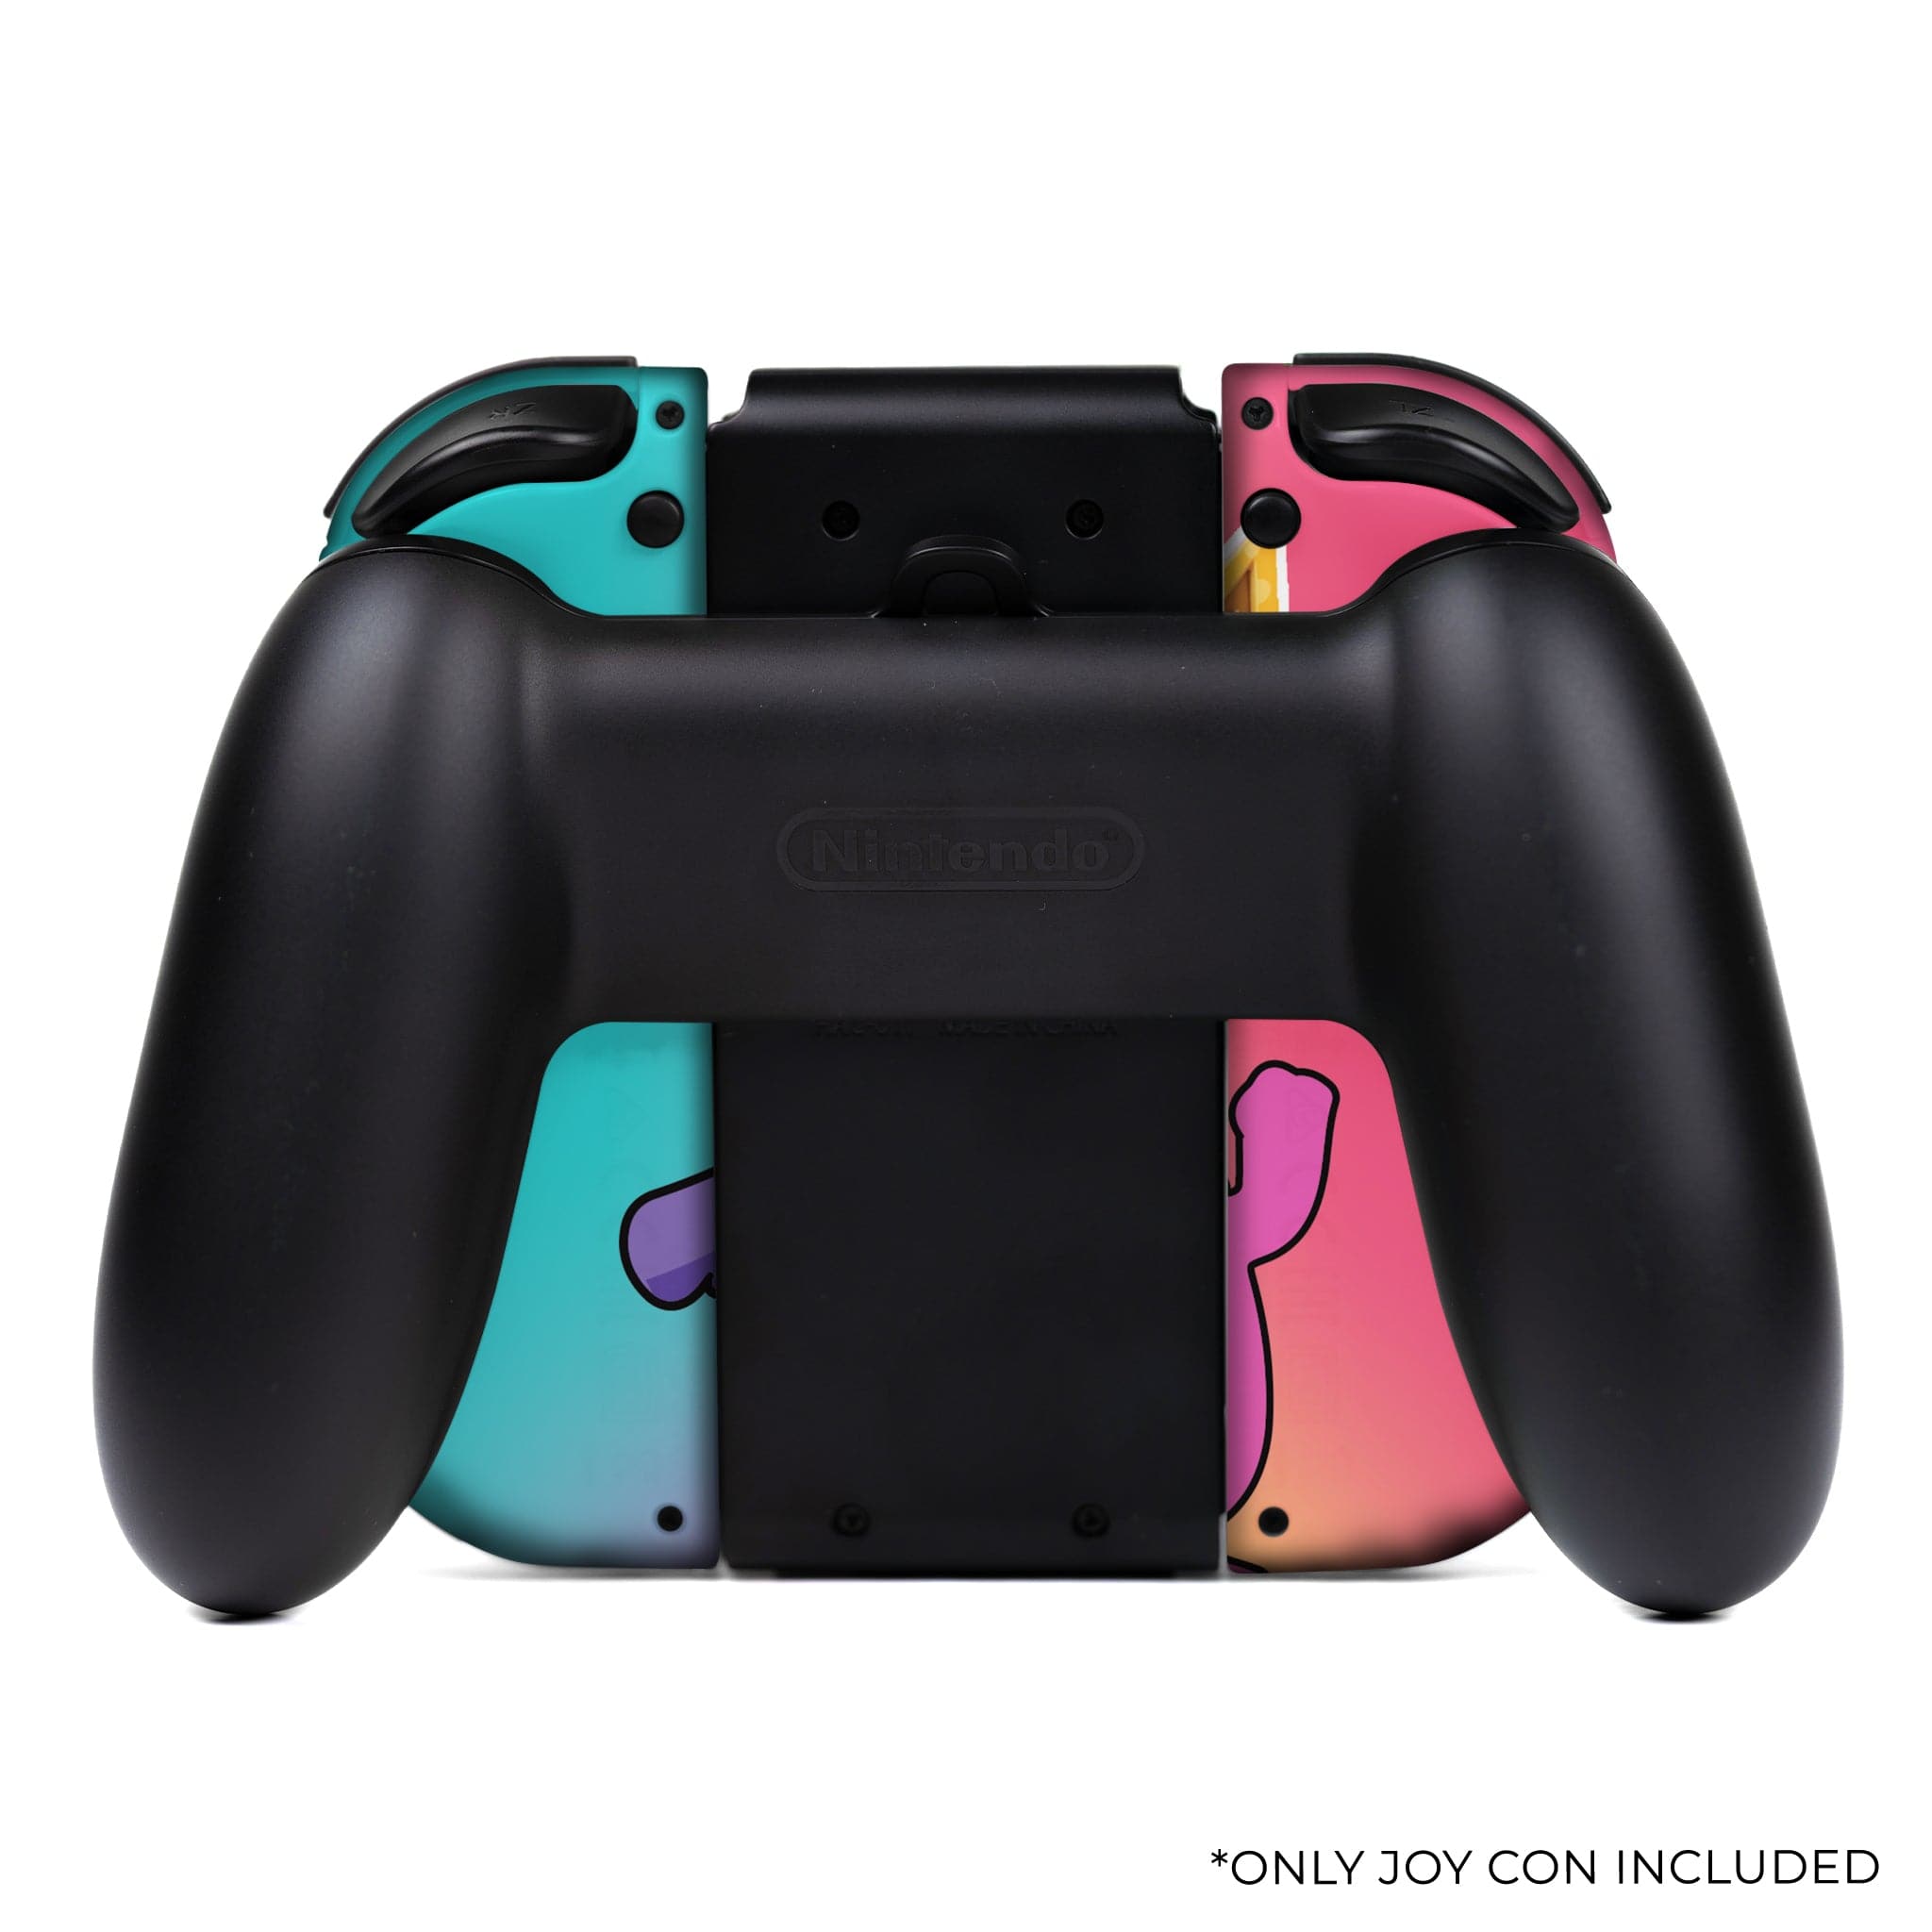 Fall Guys Inspired Nintendo Switch Joy-Con Left and Right Switch Controllers by Nintendo